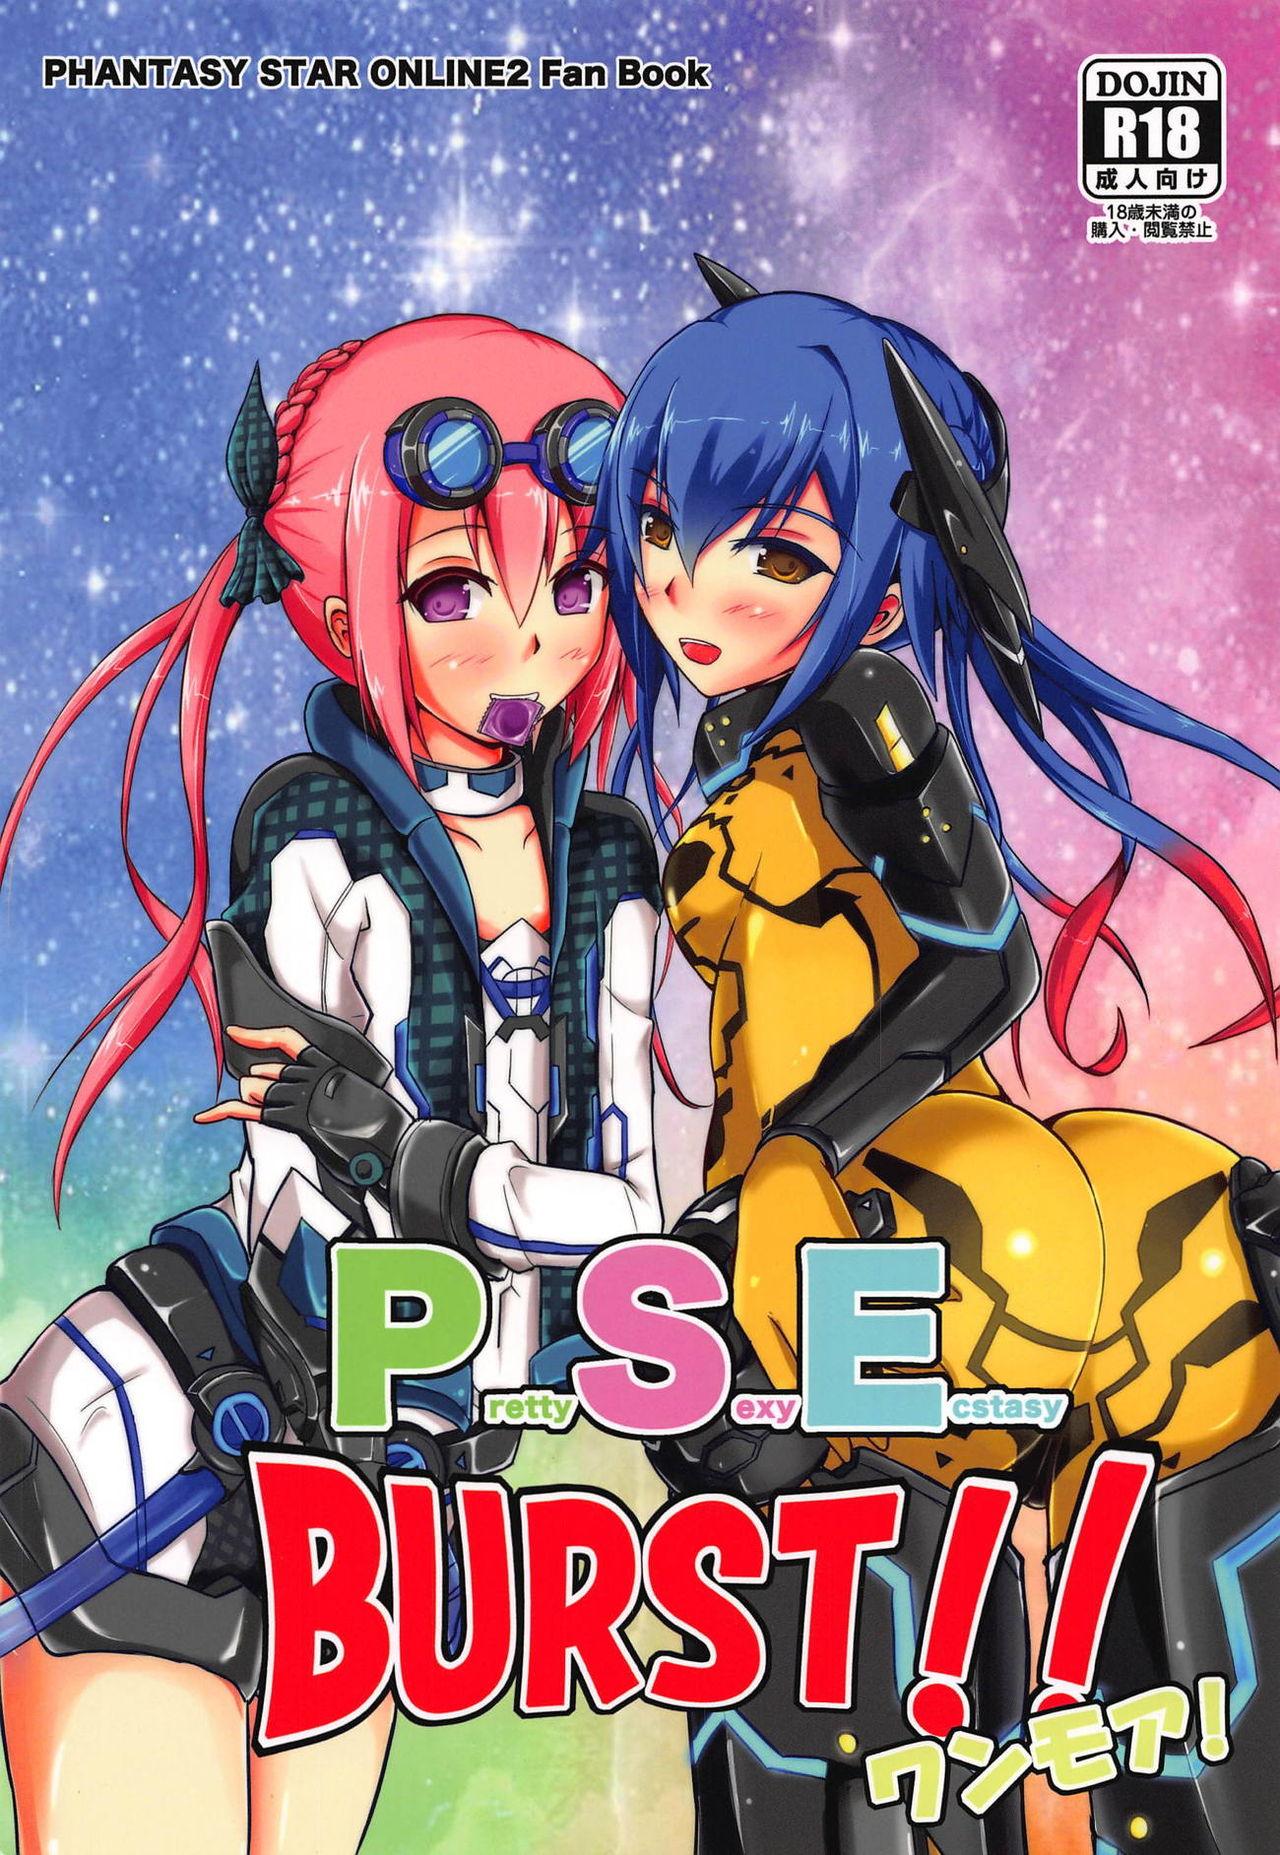 Tributo Pretty Sexy Ecstasy BURST!! One More! - Phantasy star online 2 Leaked - Picture 1